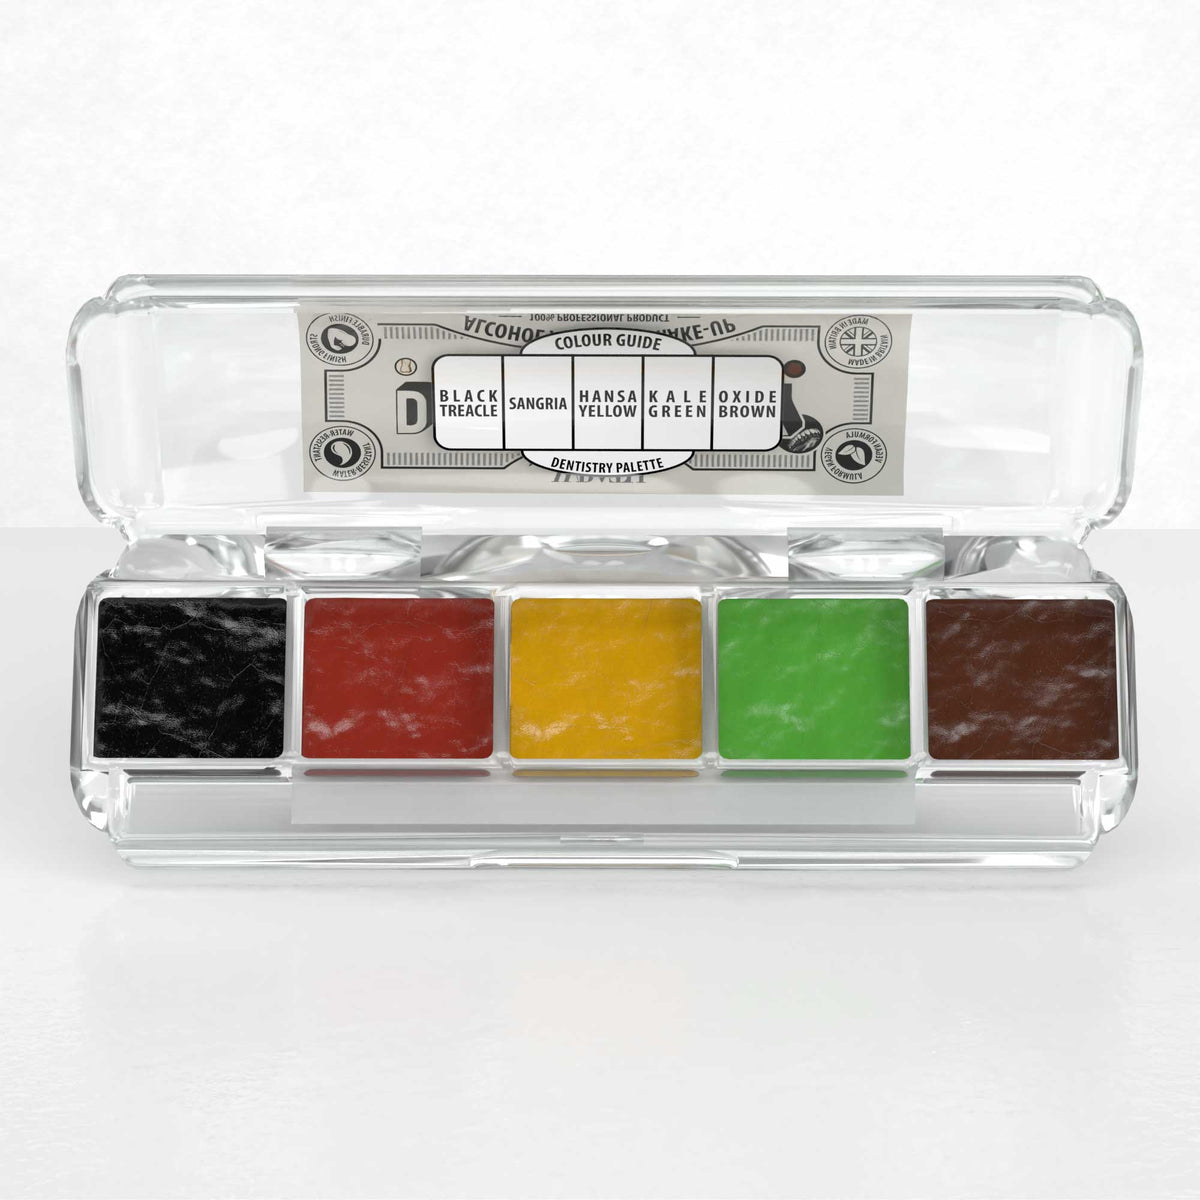 WRATH Alcohol Activated Make-up 5 Palette - Dentistry